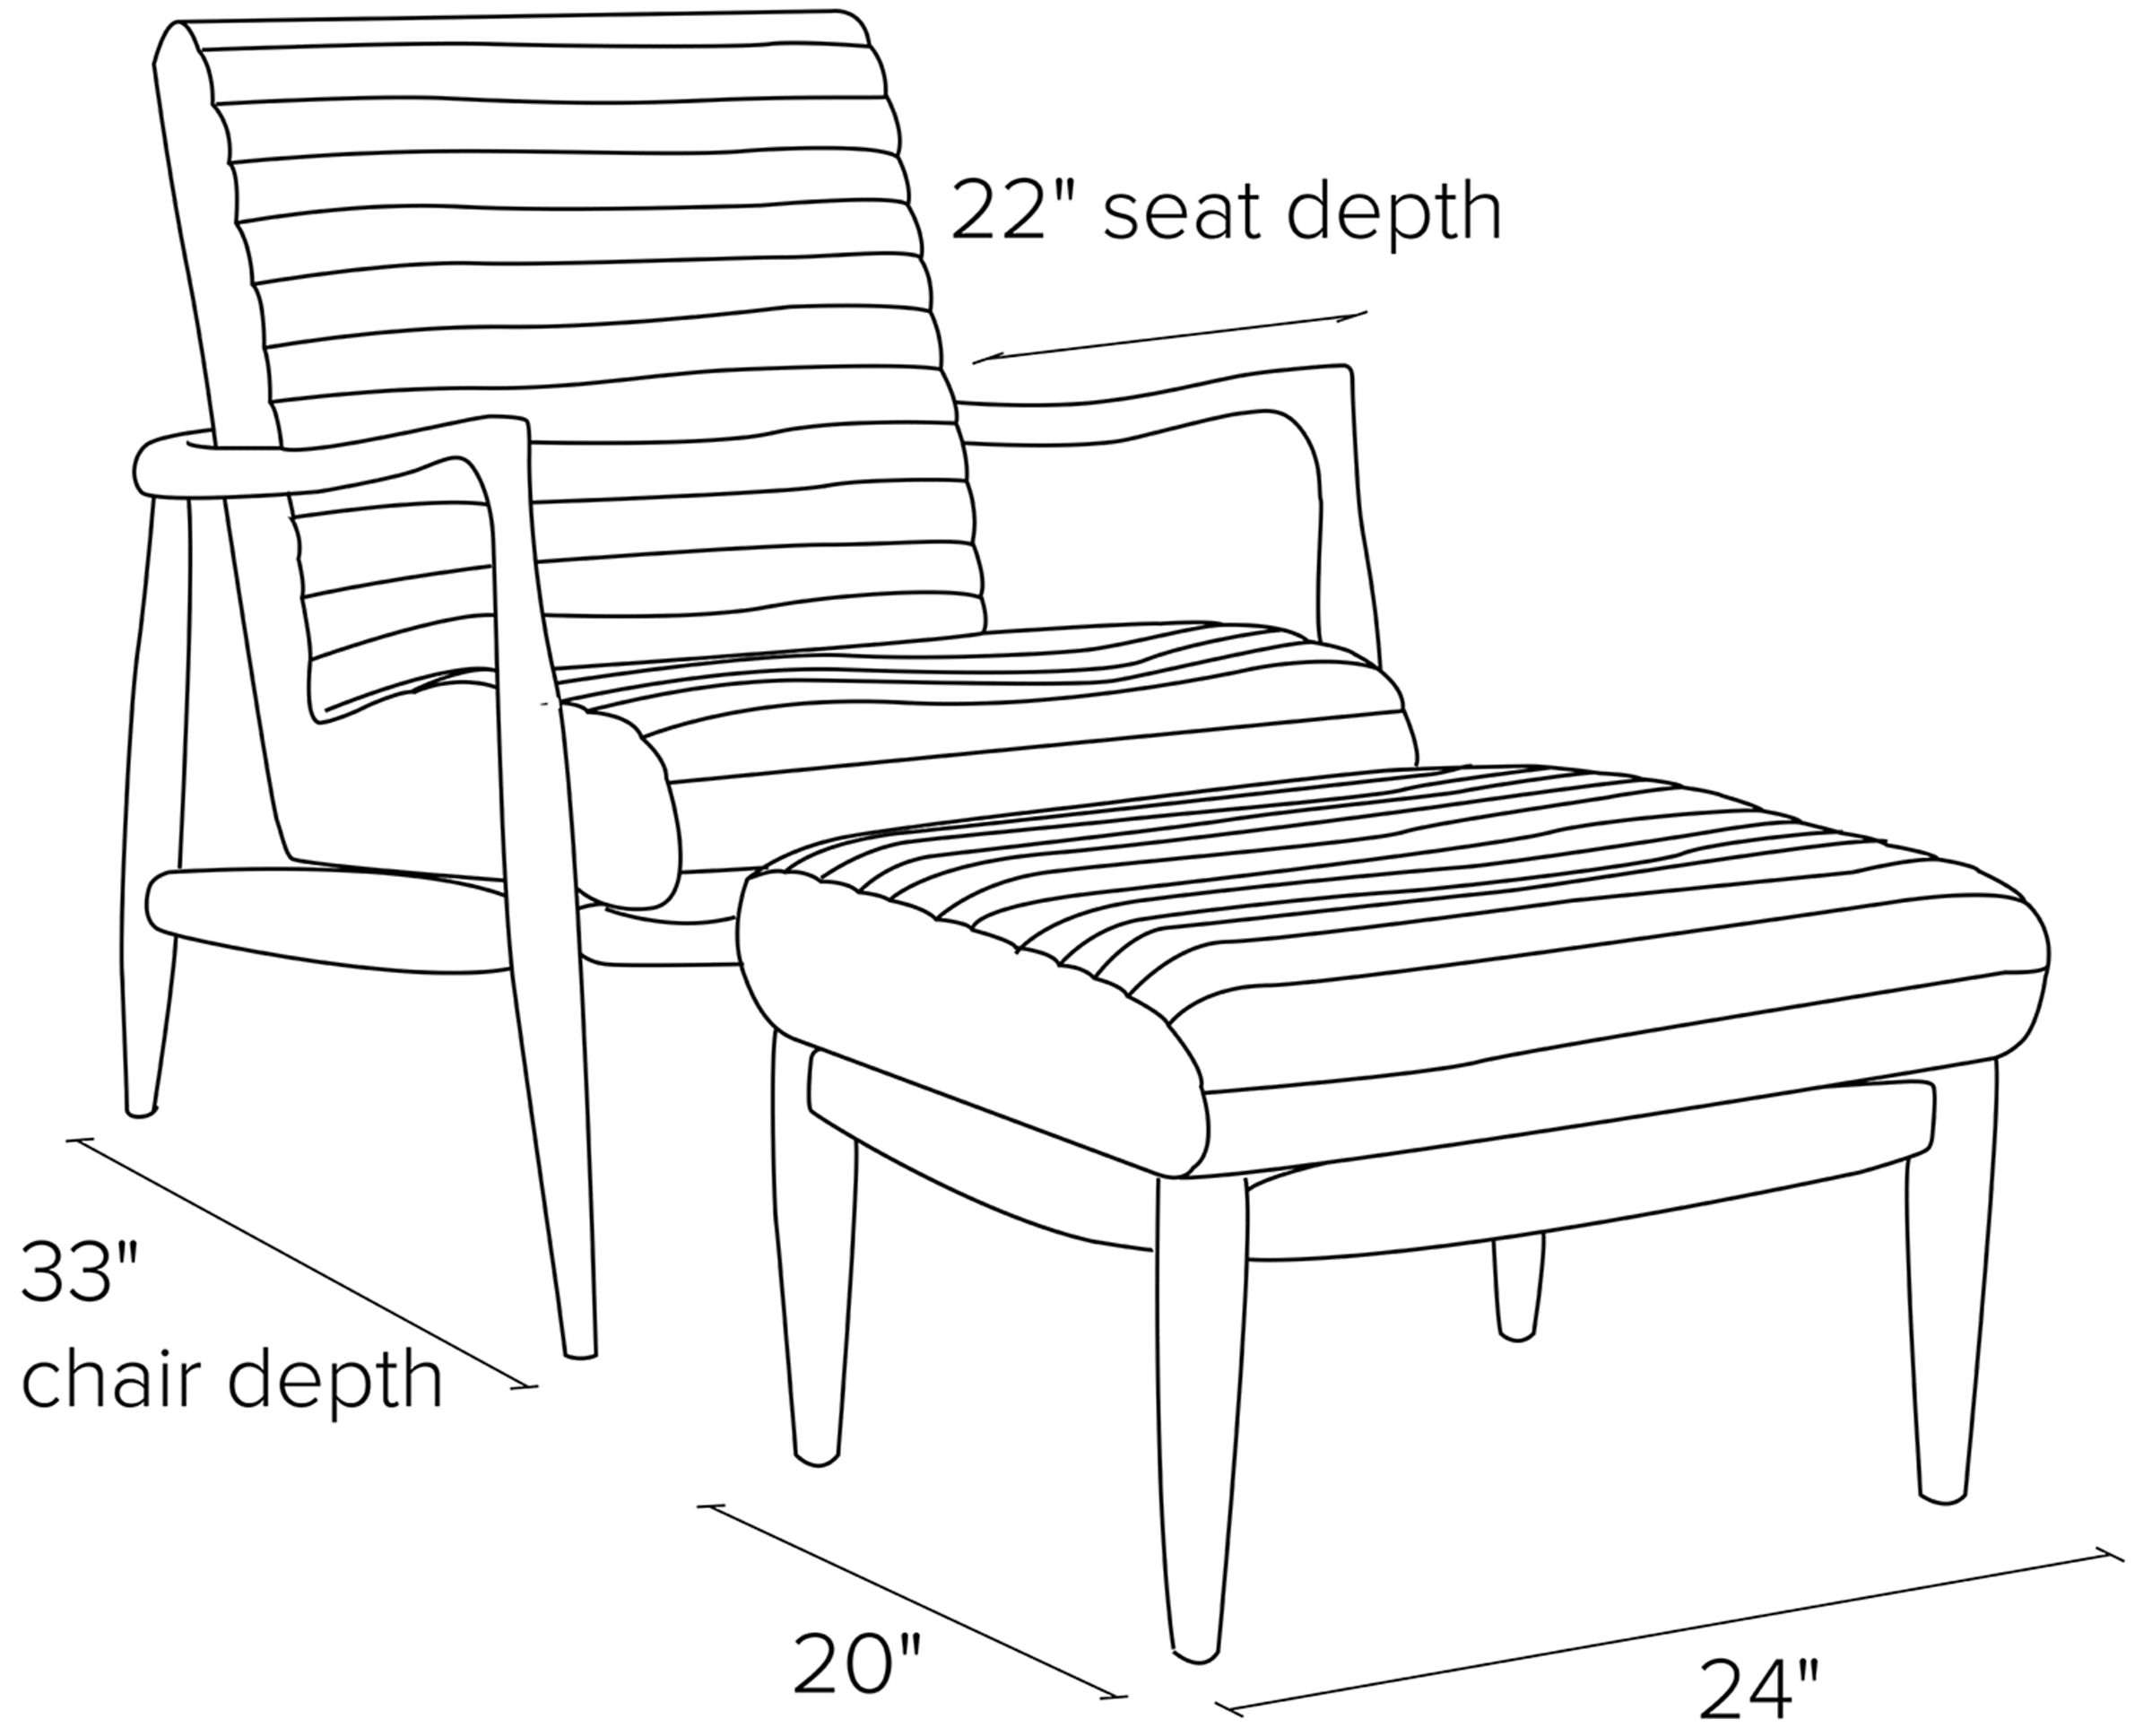 Side view dimension illustration of Callan chair and ottoman.